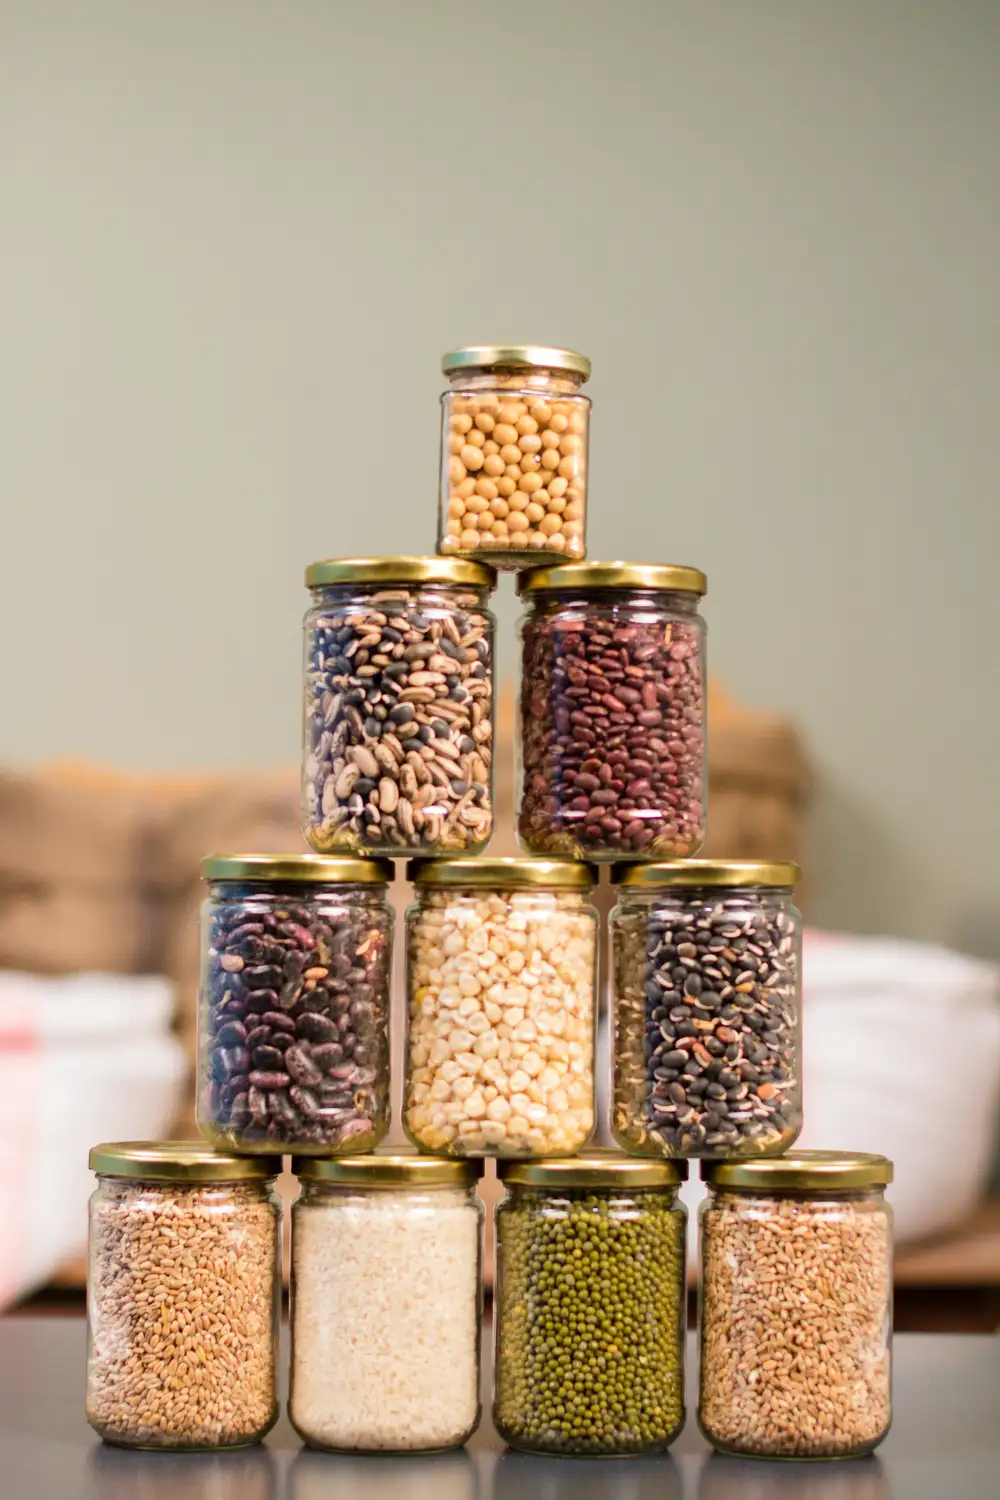 Airtight containers filled with different seeds